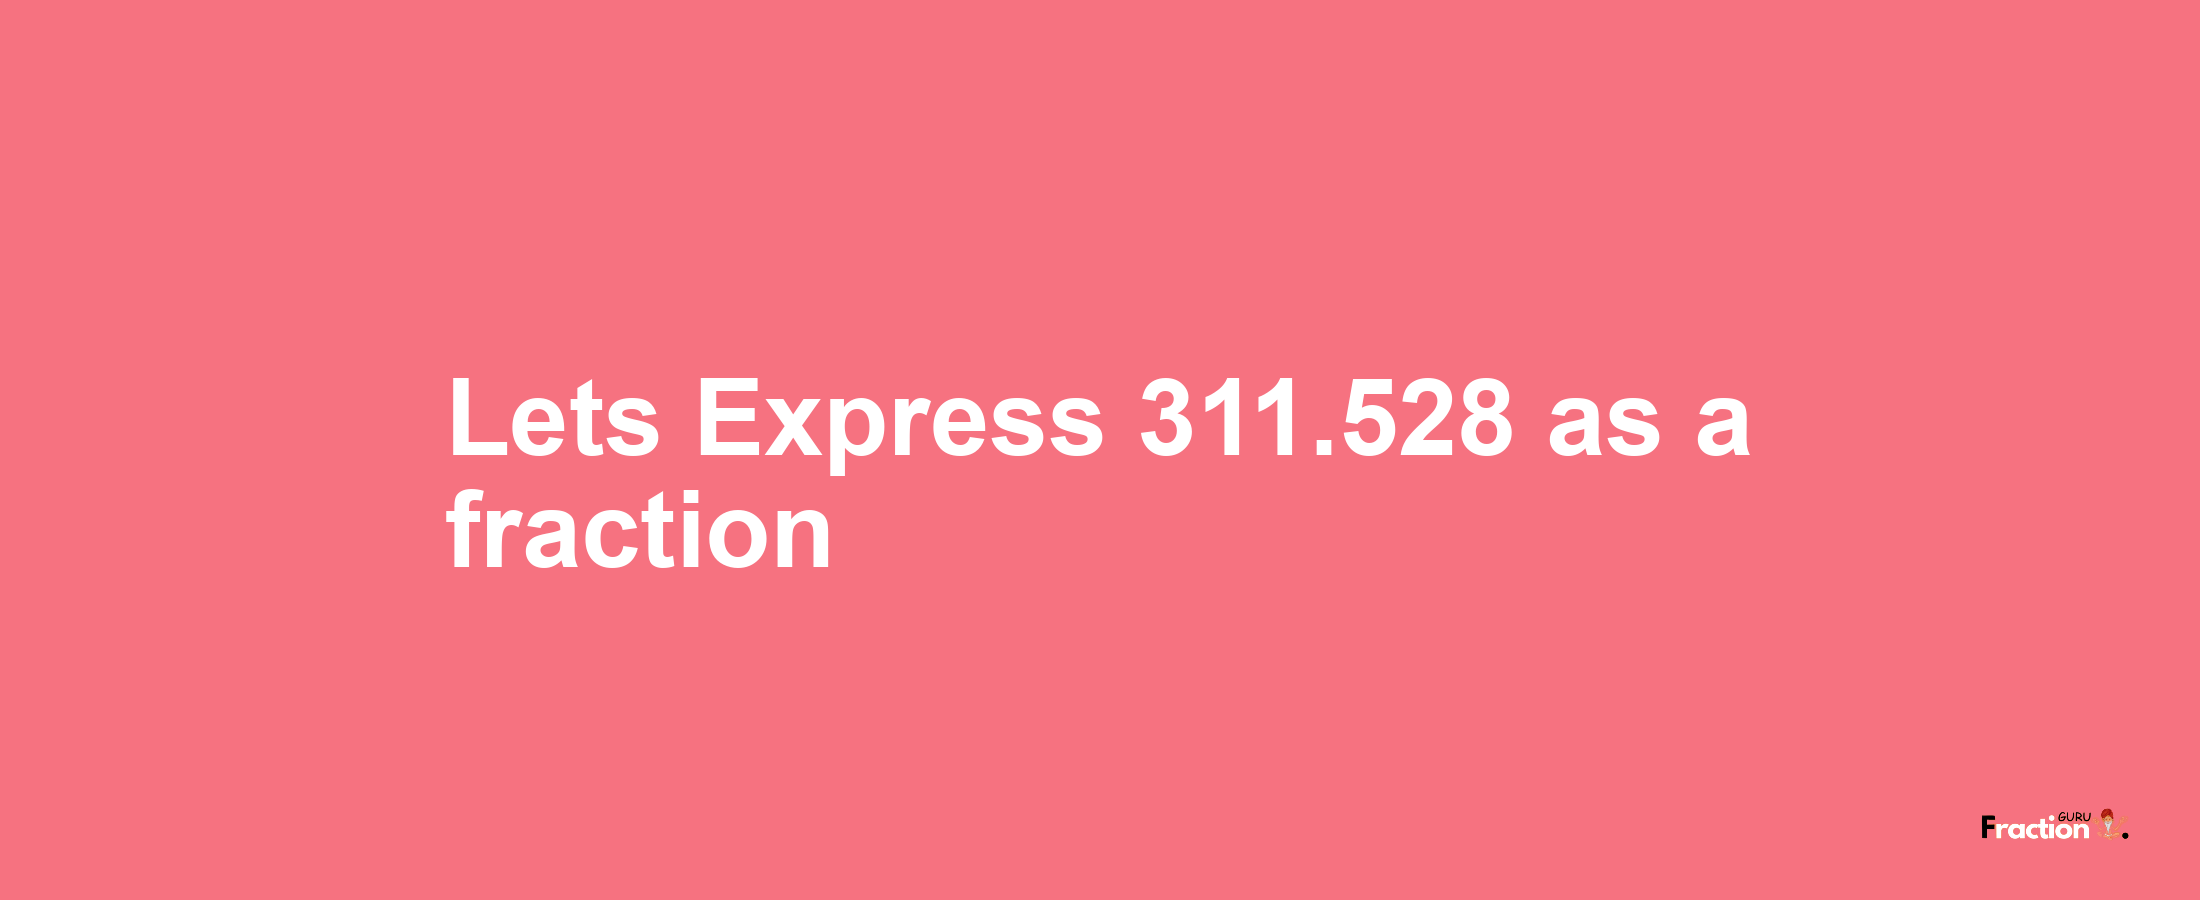 Lets Express 311.528 as afraction